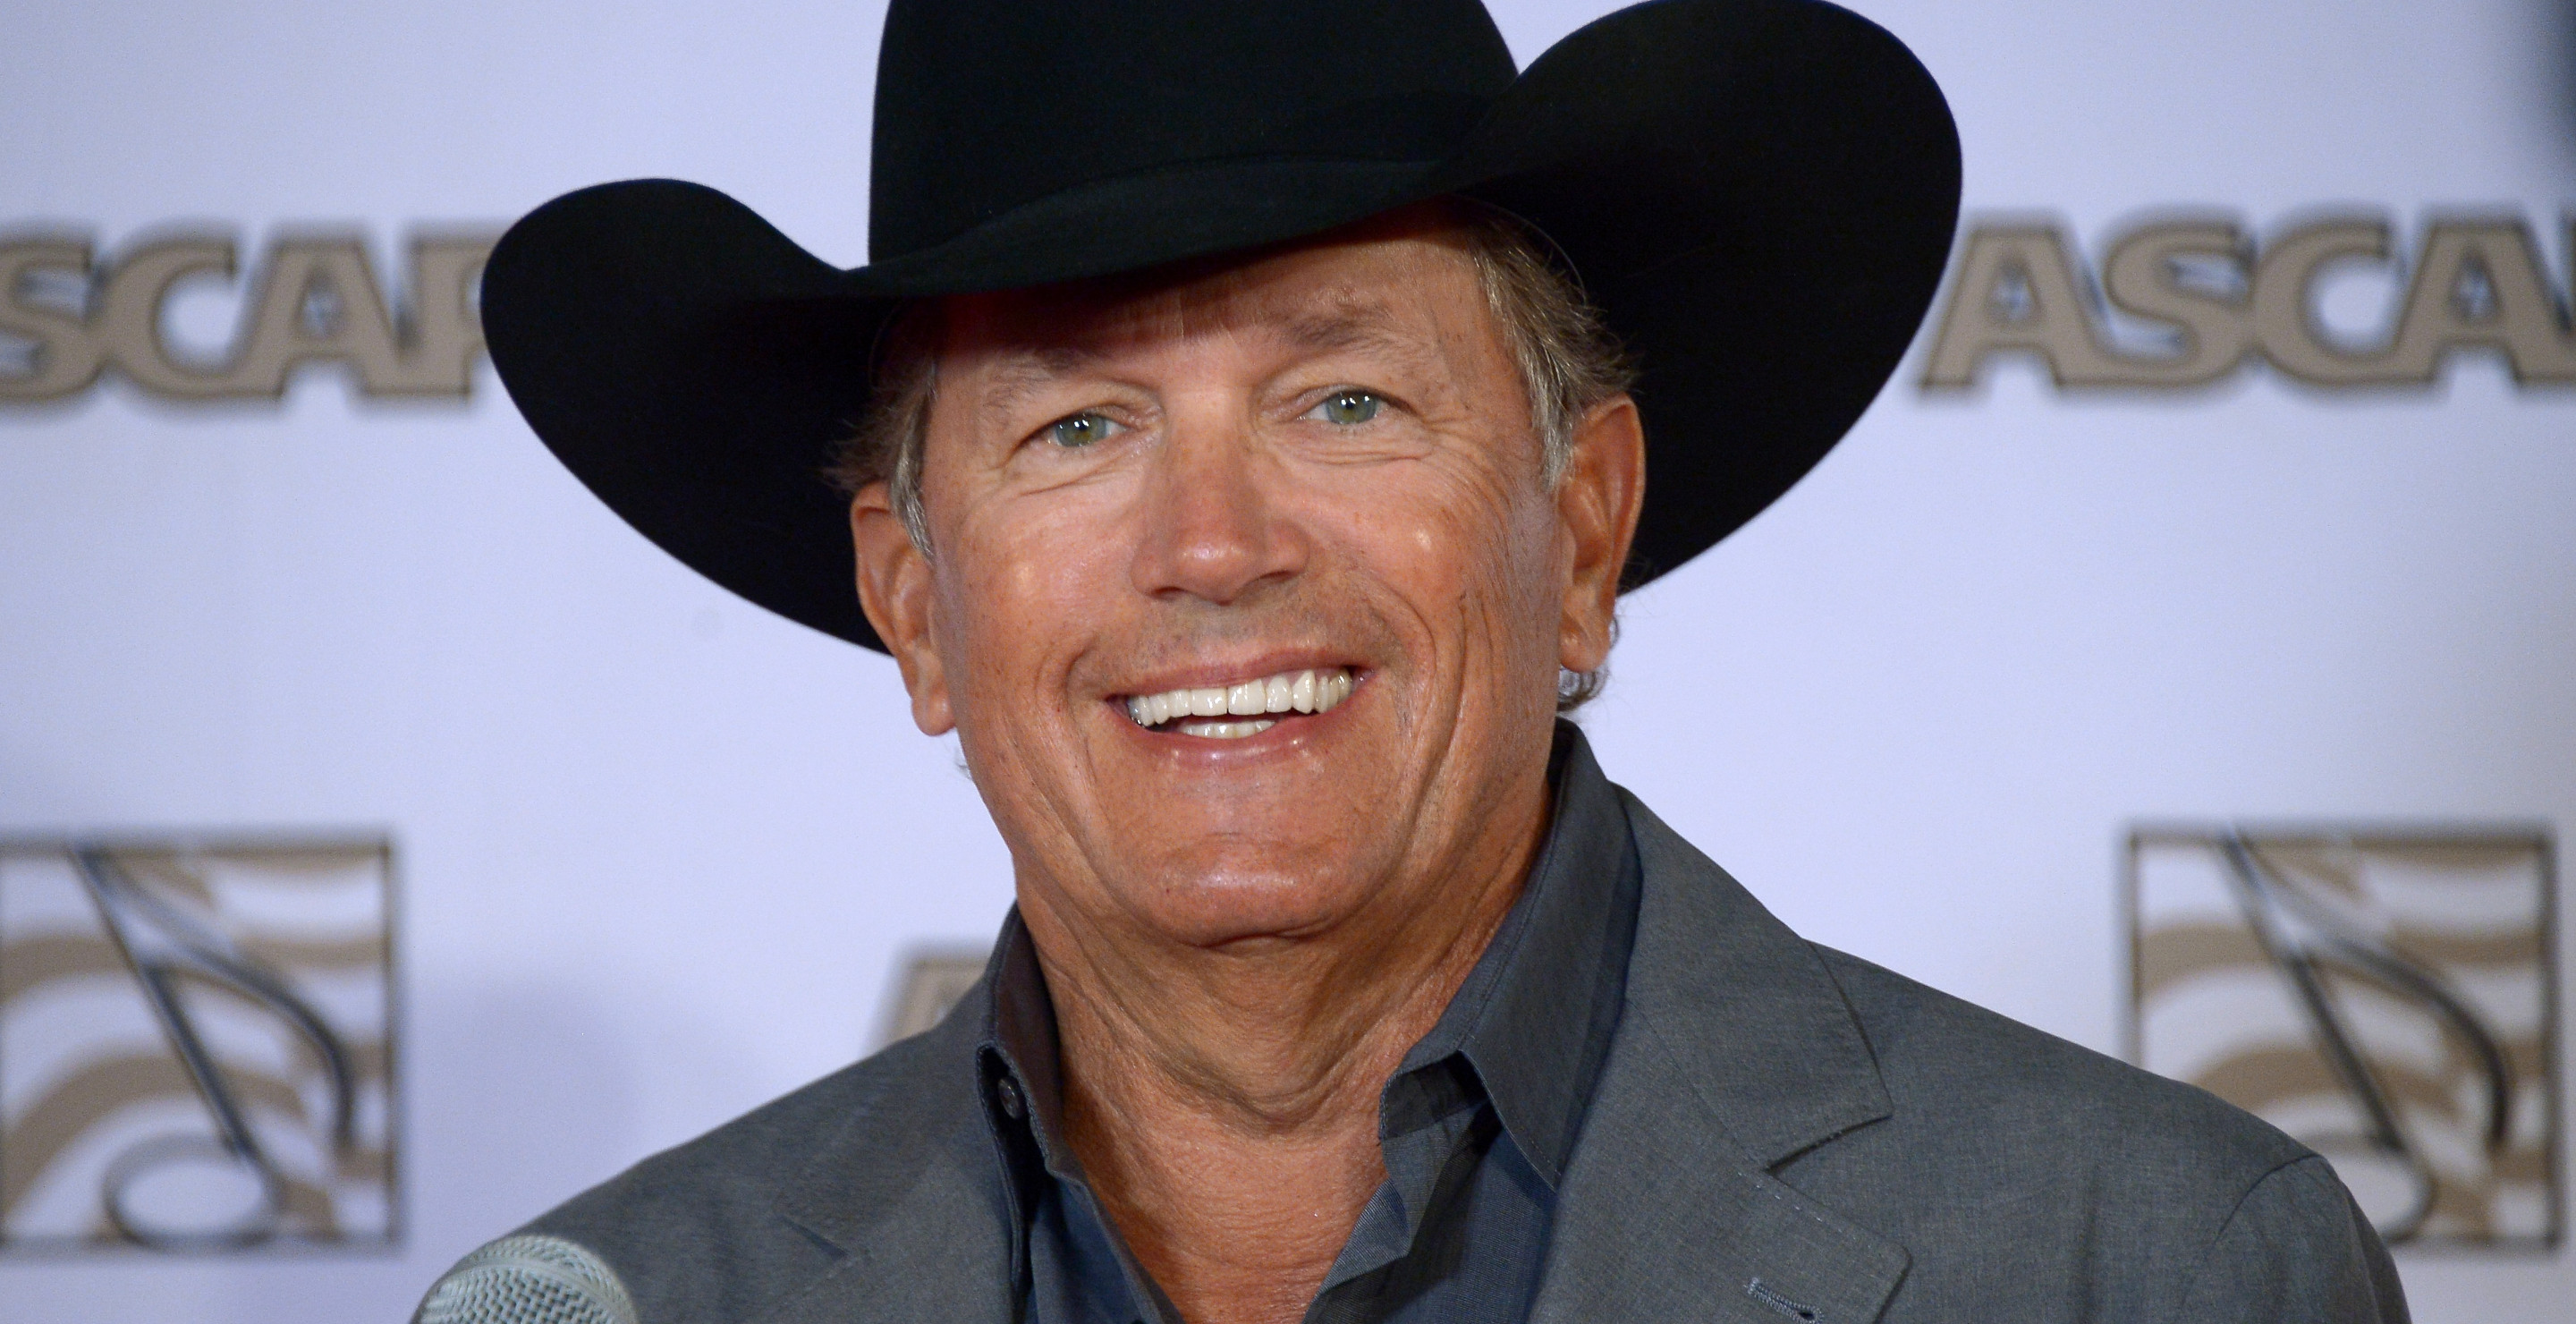 George Strait Mourns The Lost Of Another One Of His Good Friends As Fans Offer Support